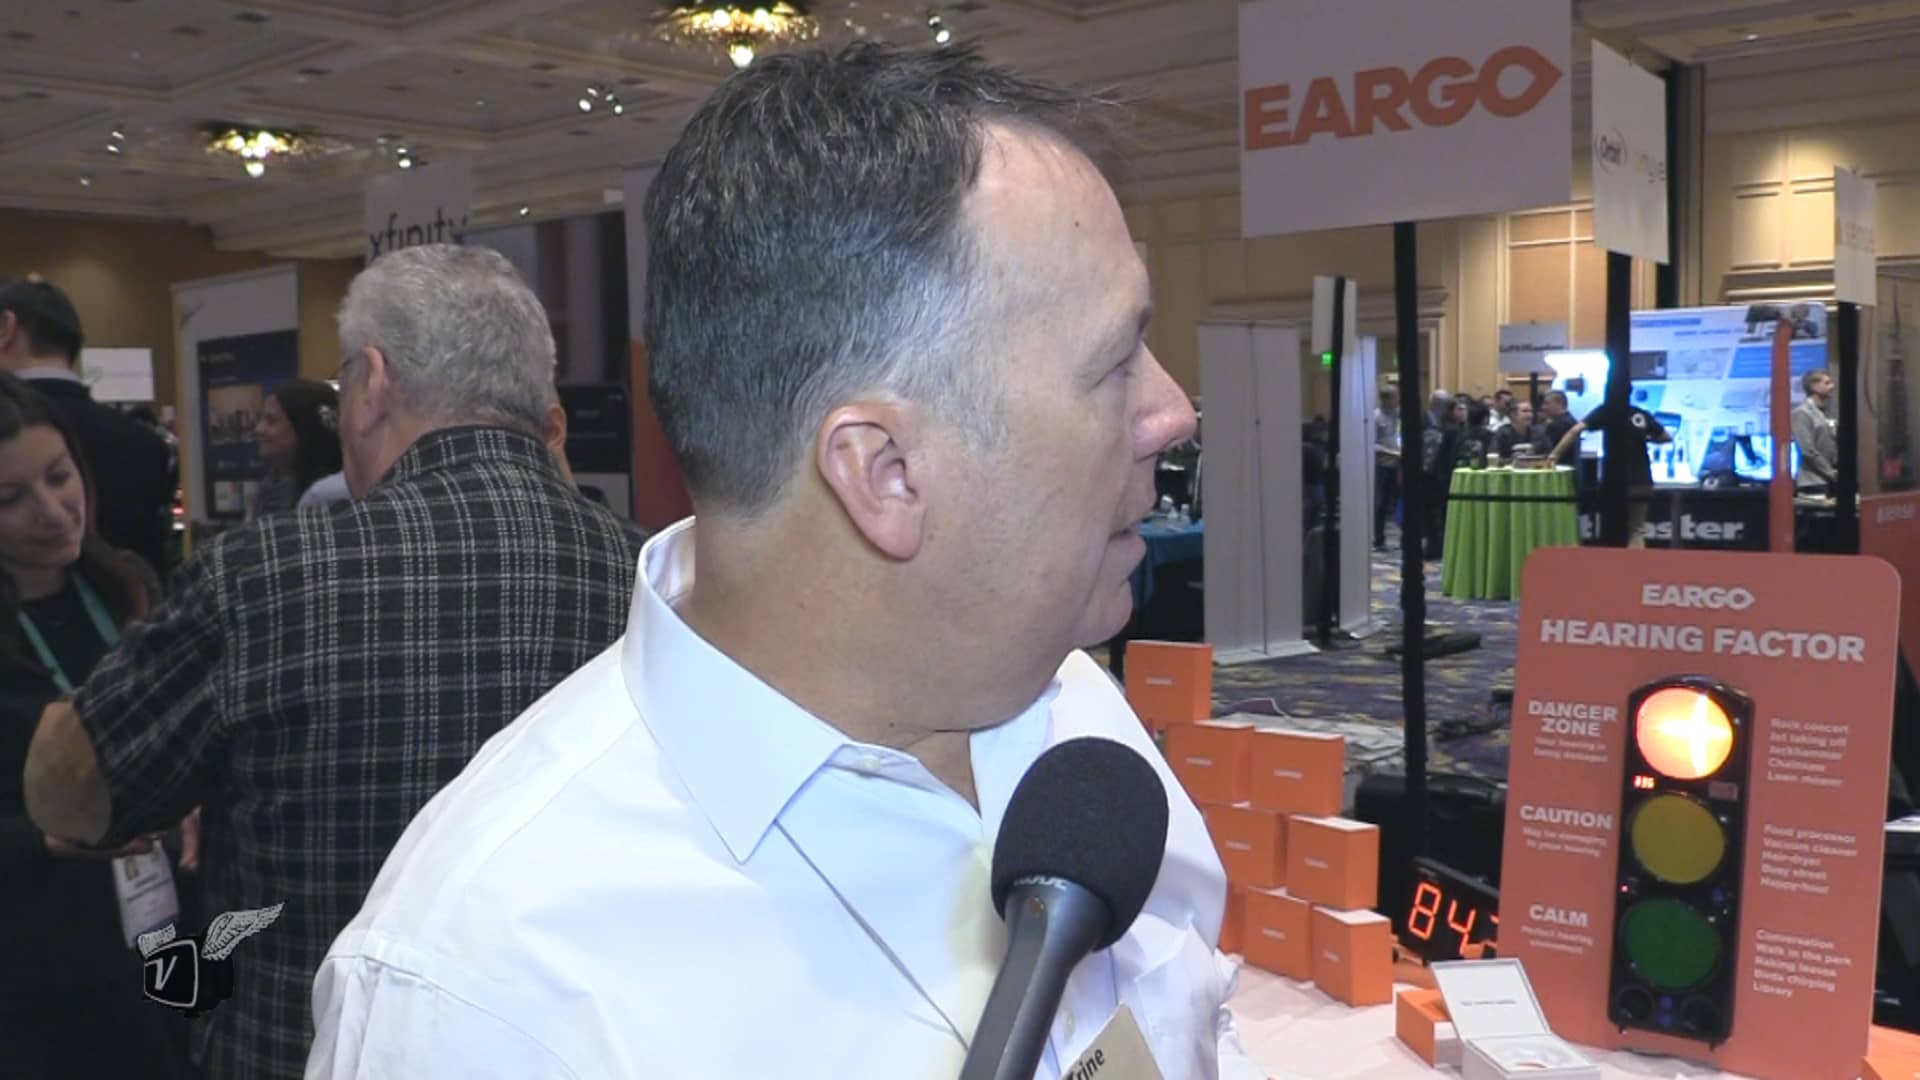 Eargo at CES2020 talking about their remote audiologist approach to helping improve people hear without having to visit an office.